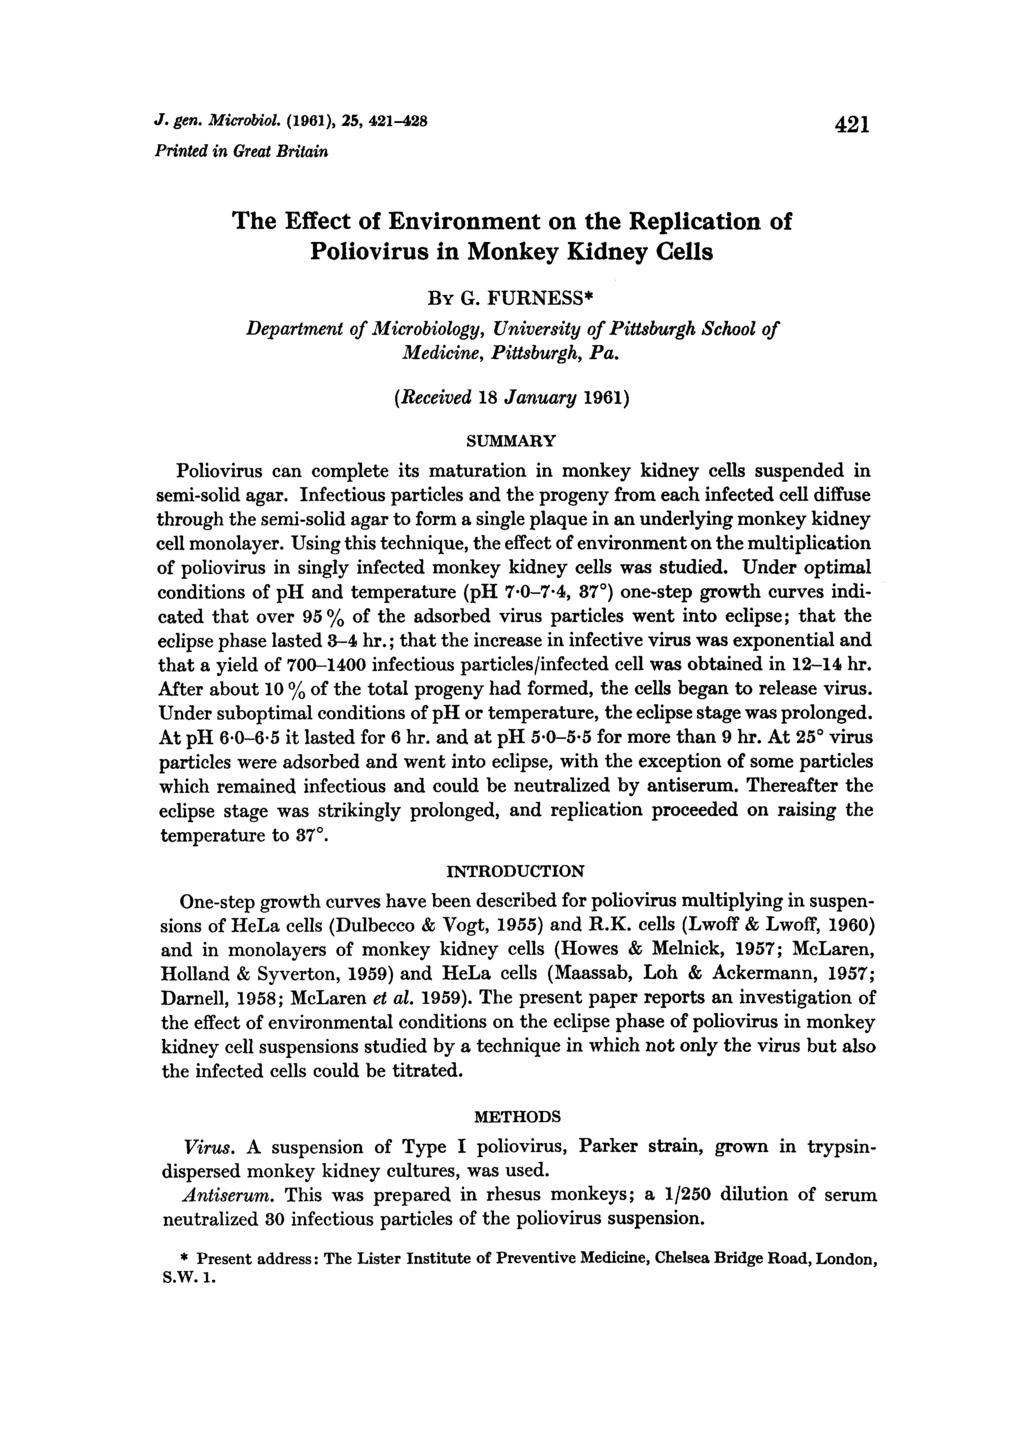 J. gen. Mimobiol. (1961), 25, 421428 Printed in Great Britain 421 The Effect of Environment on the Replication of Poliovirus in Monkey Kidney Cells BY G.